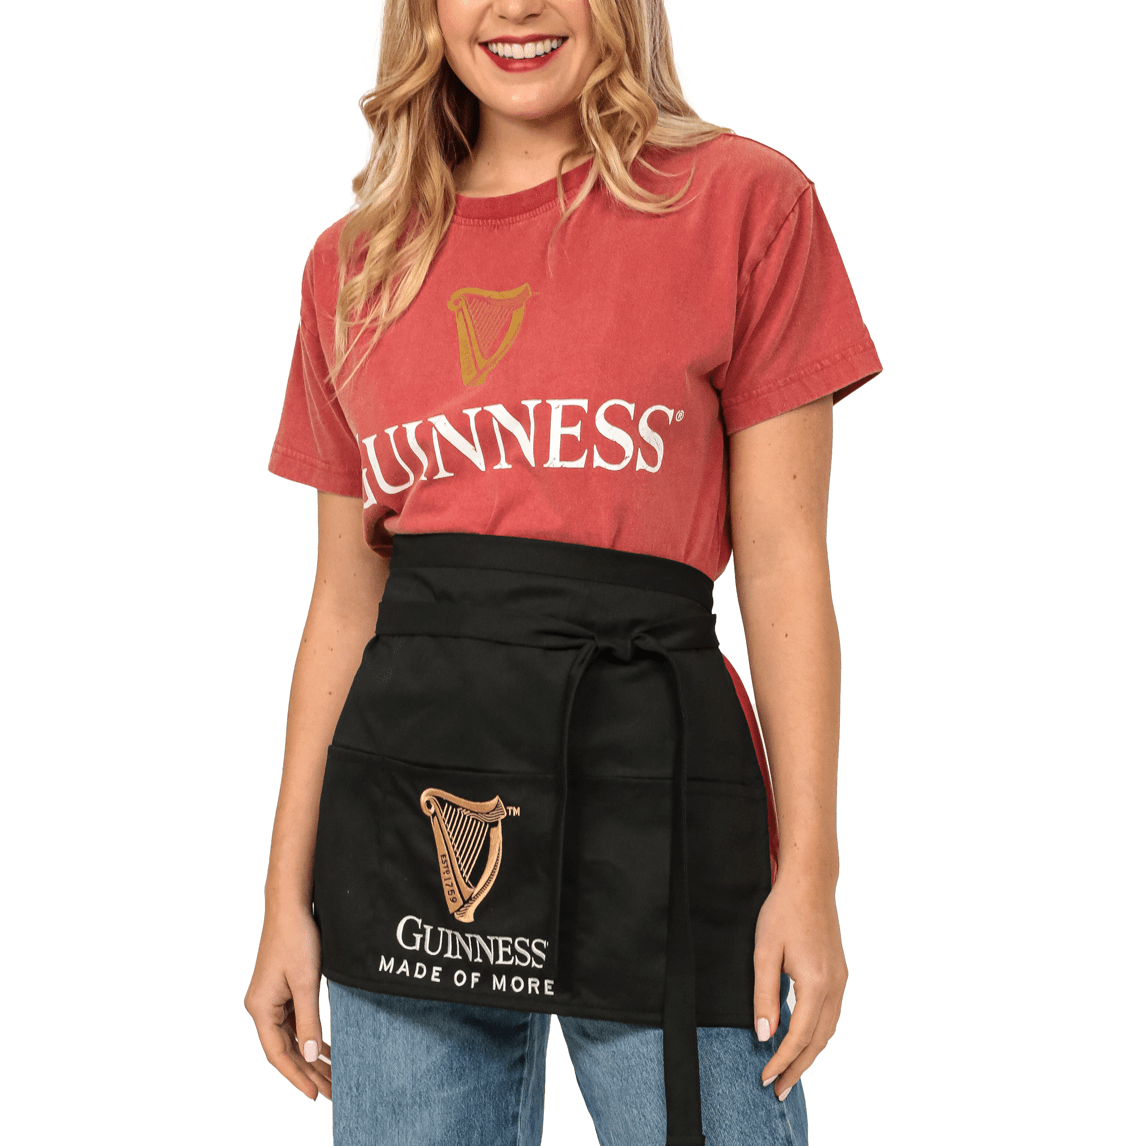 A woman wearing a Guinness apron while enjoying a cup of Guinness Kitchen Gift Box Ground Coffee.